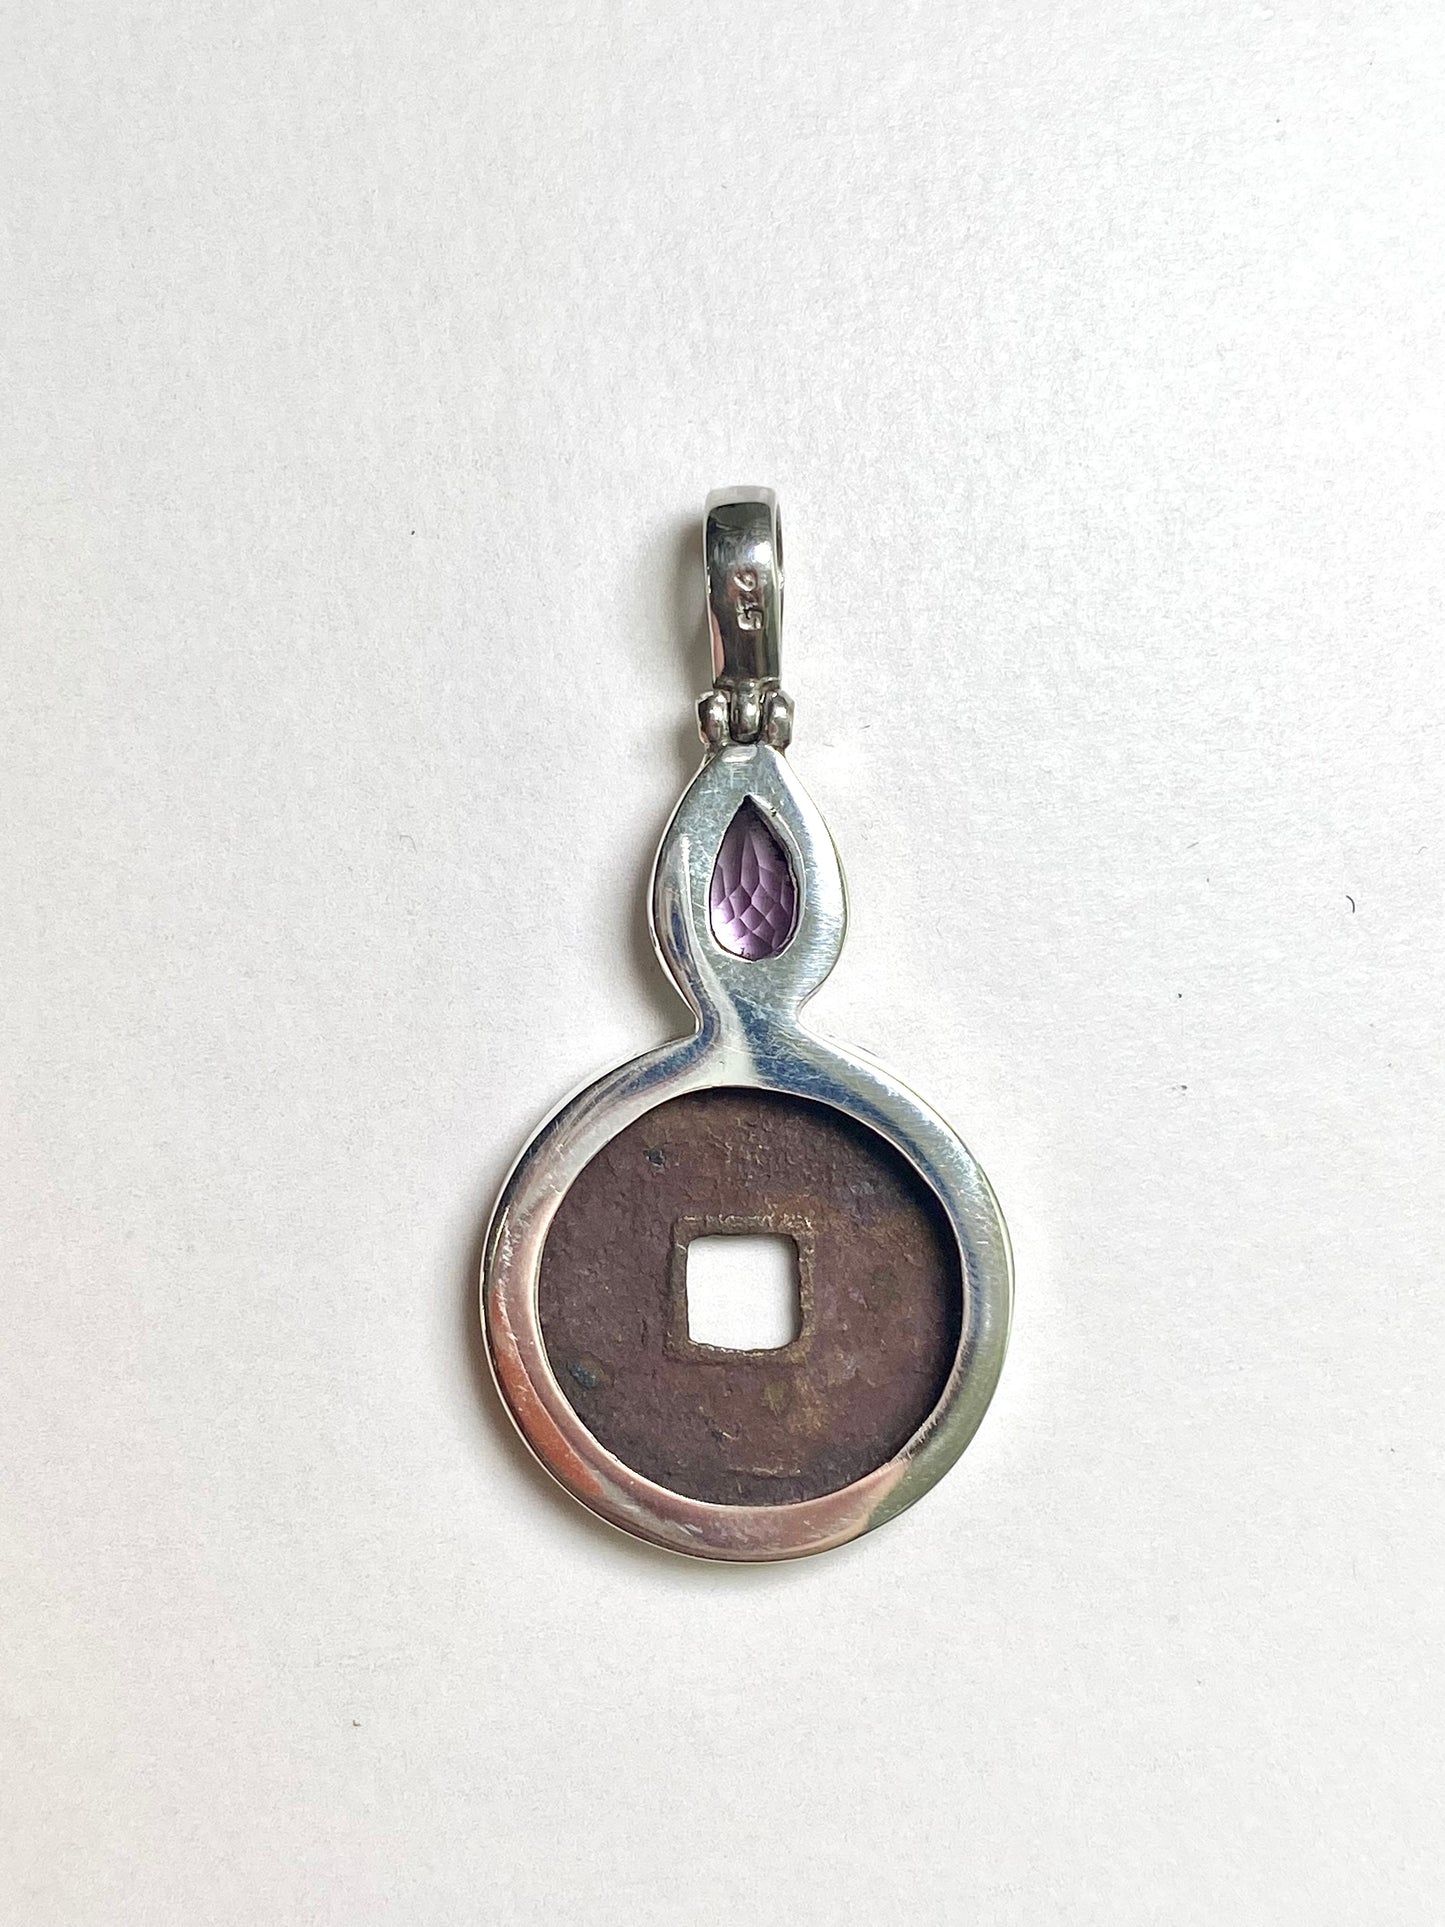 Antique early Ming Yong Le Reign Cash Coin Pendant- Sterling Silver w Amethyst circa 1408-1424